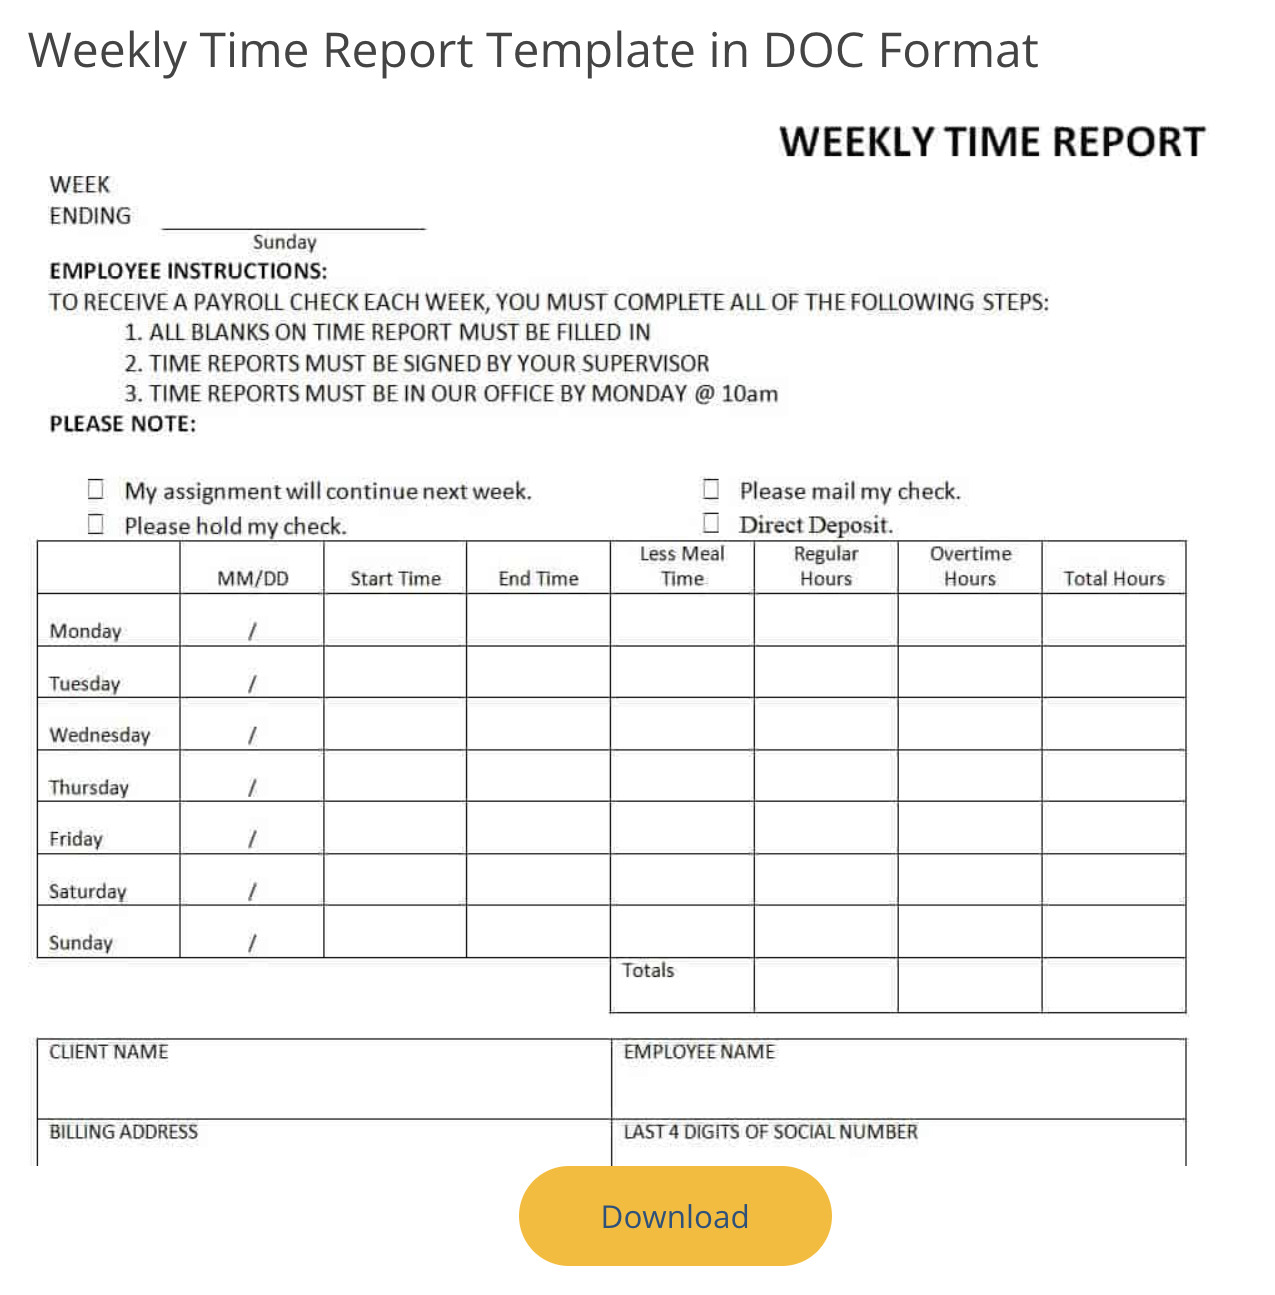 Image of template from Free Report Templates